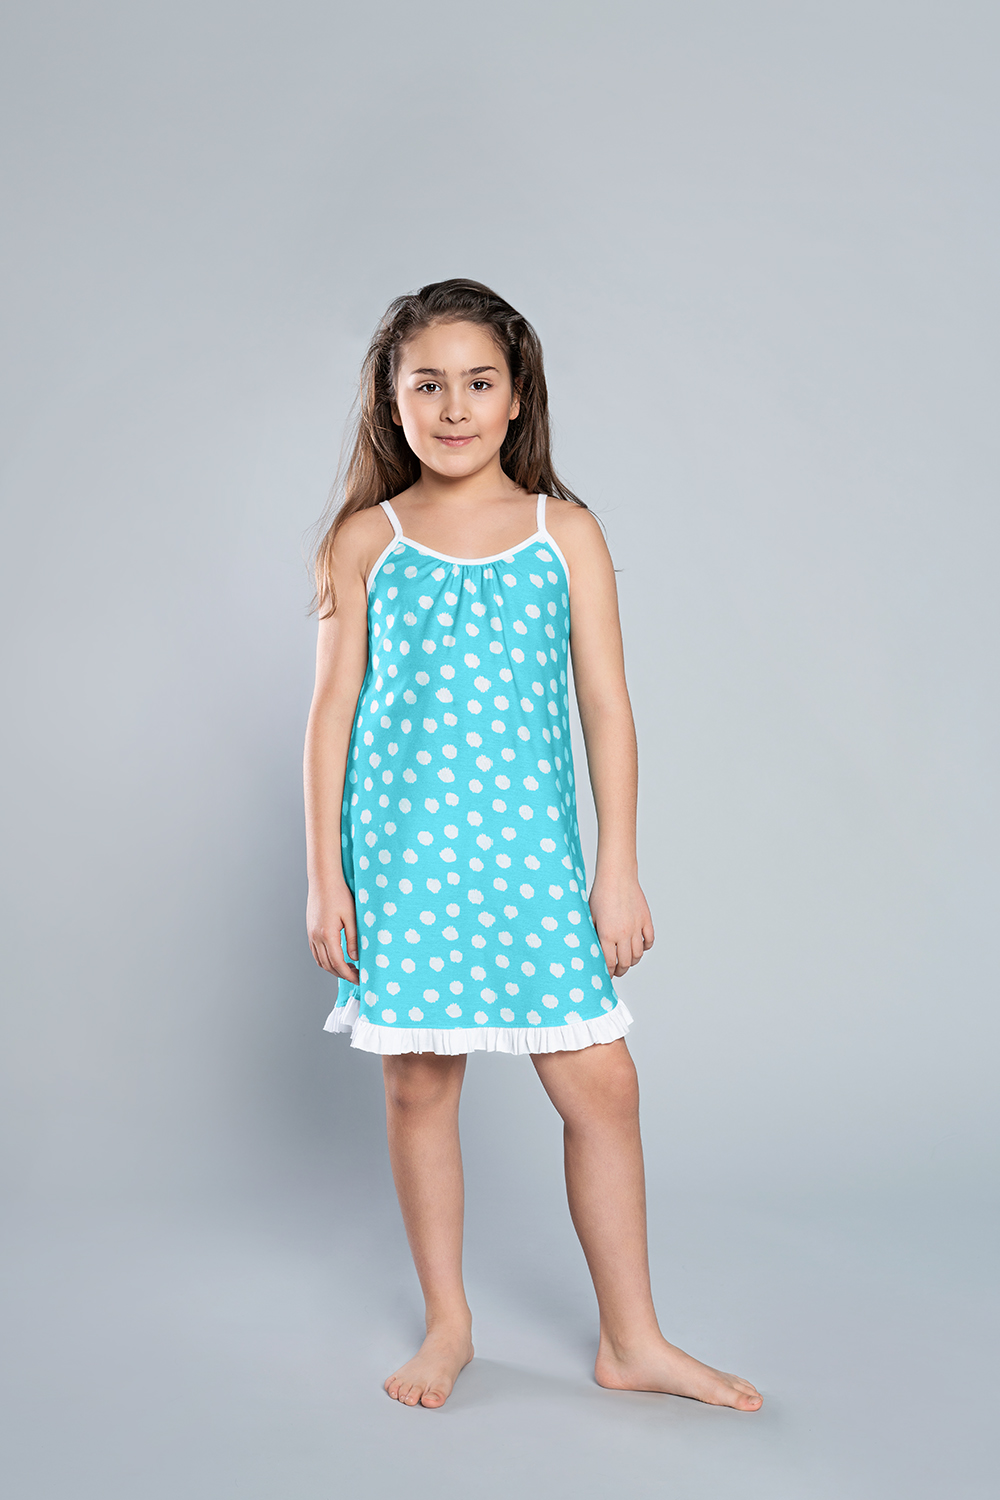 Alka shirt for girls with narrow straps - turquoise print